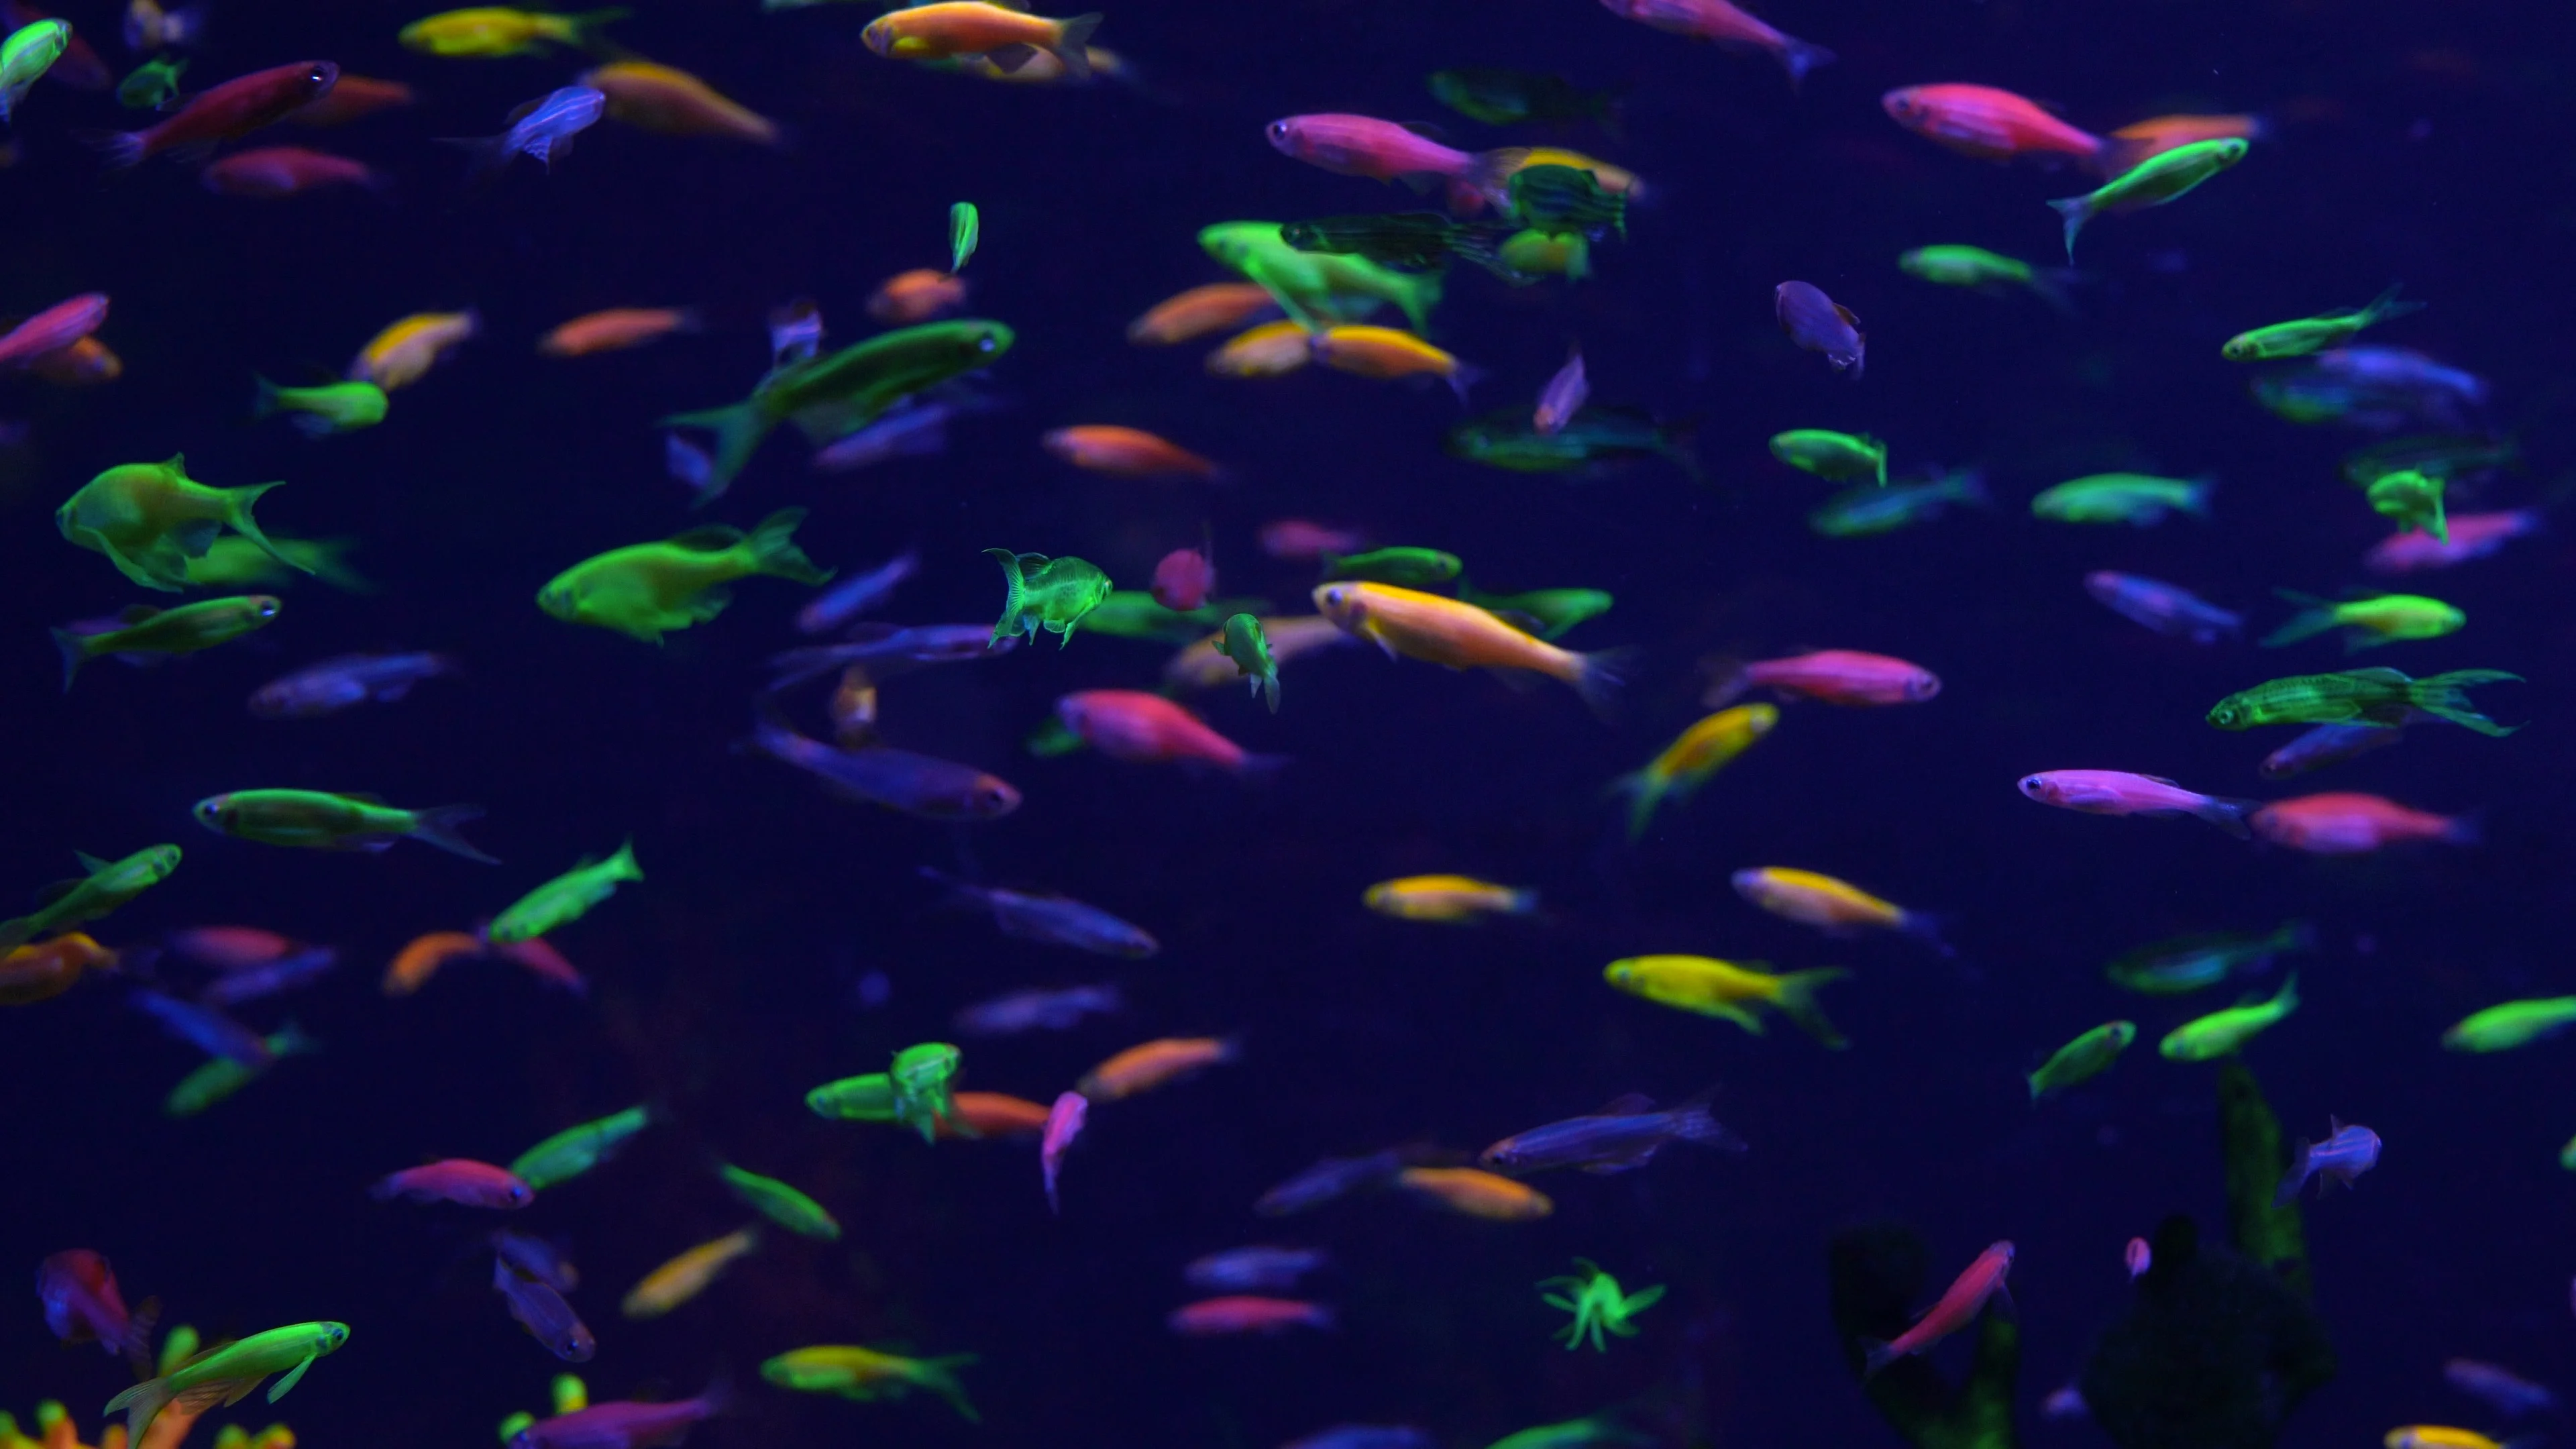 Lots of small neon fish in the aquarium Stock Photo by vlad_star